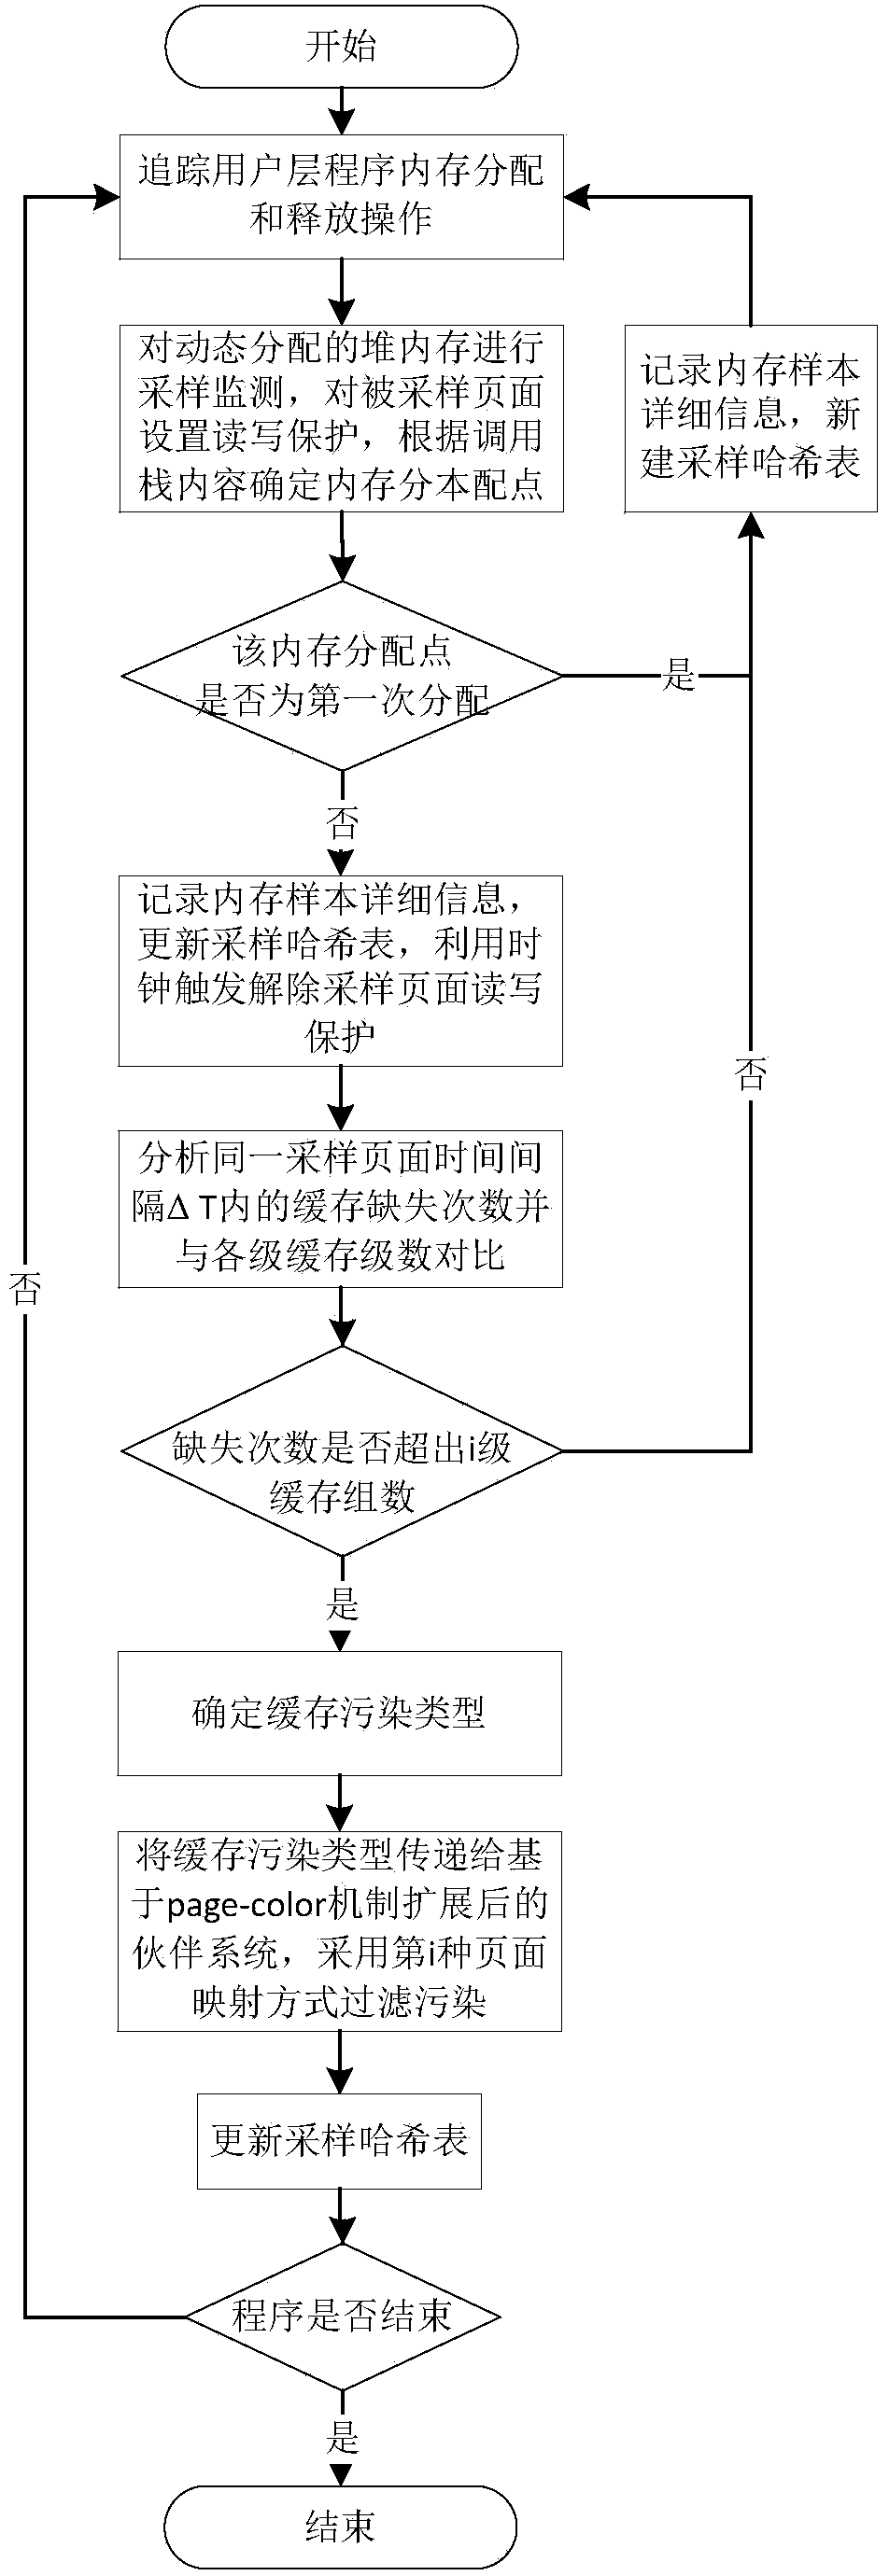 Dynamic cache pollution prevention system and method